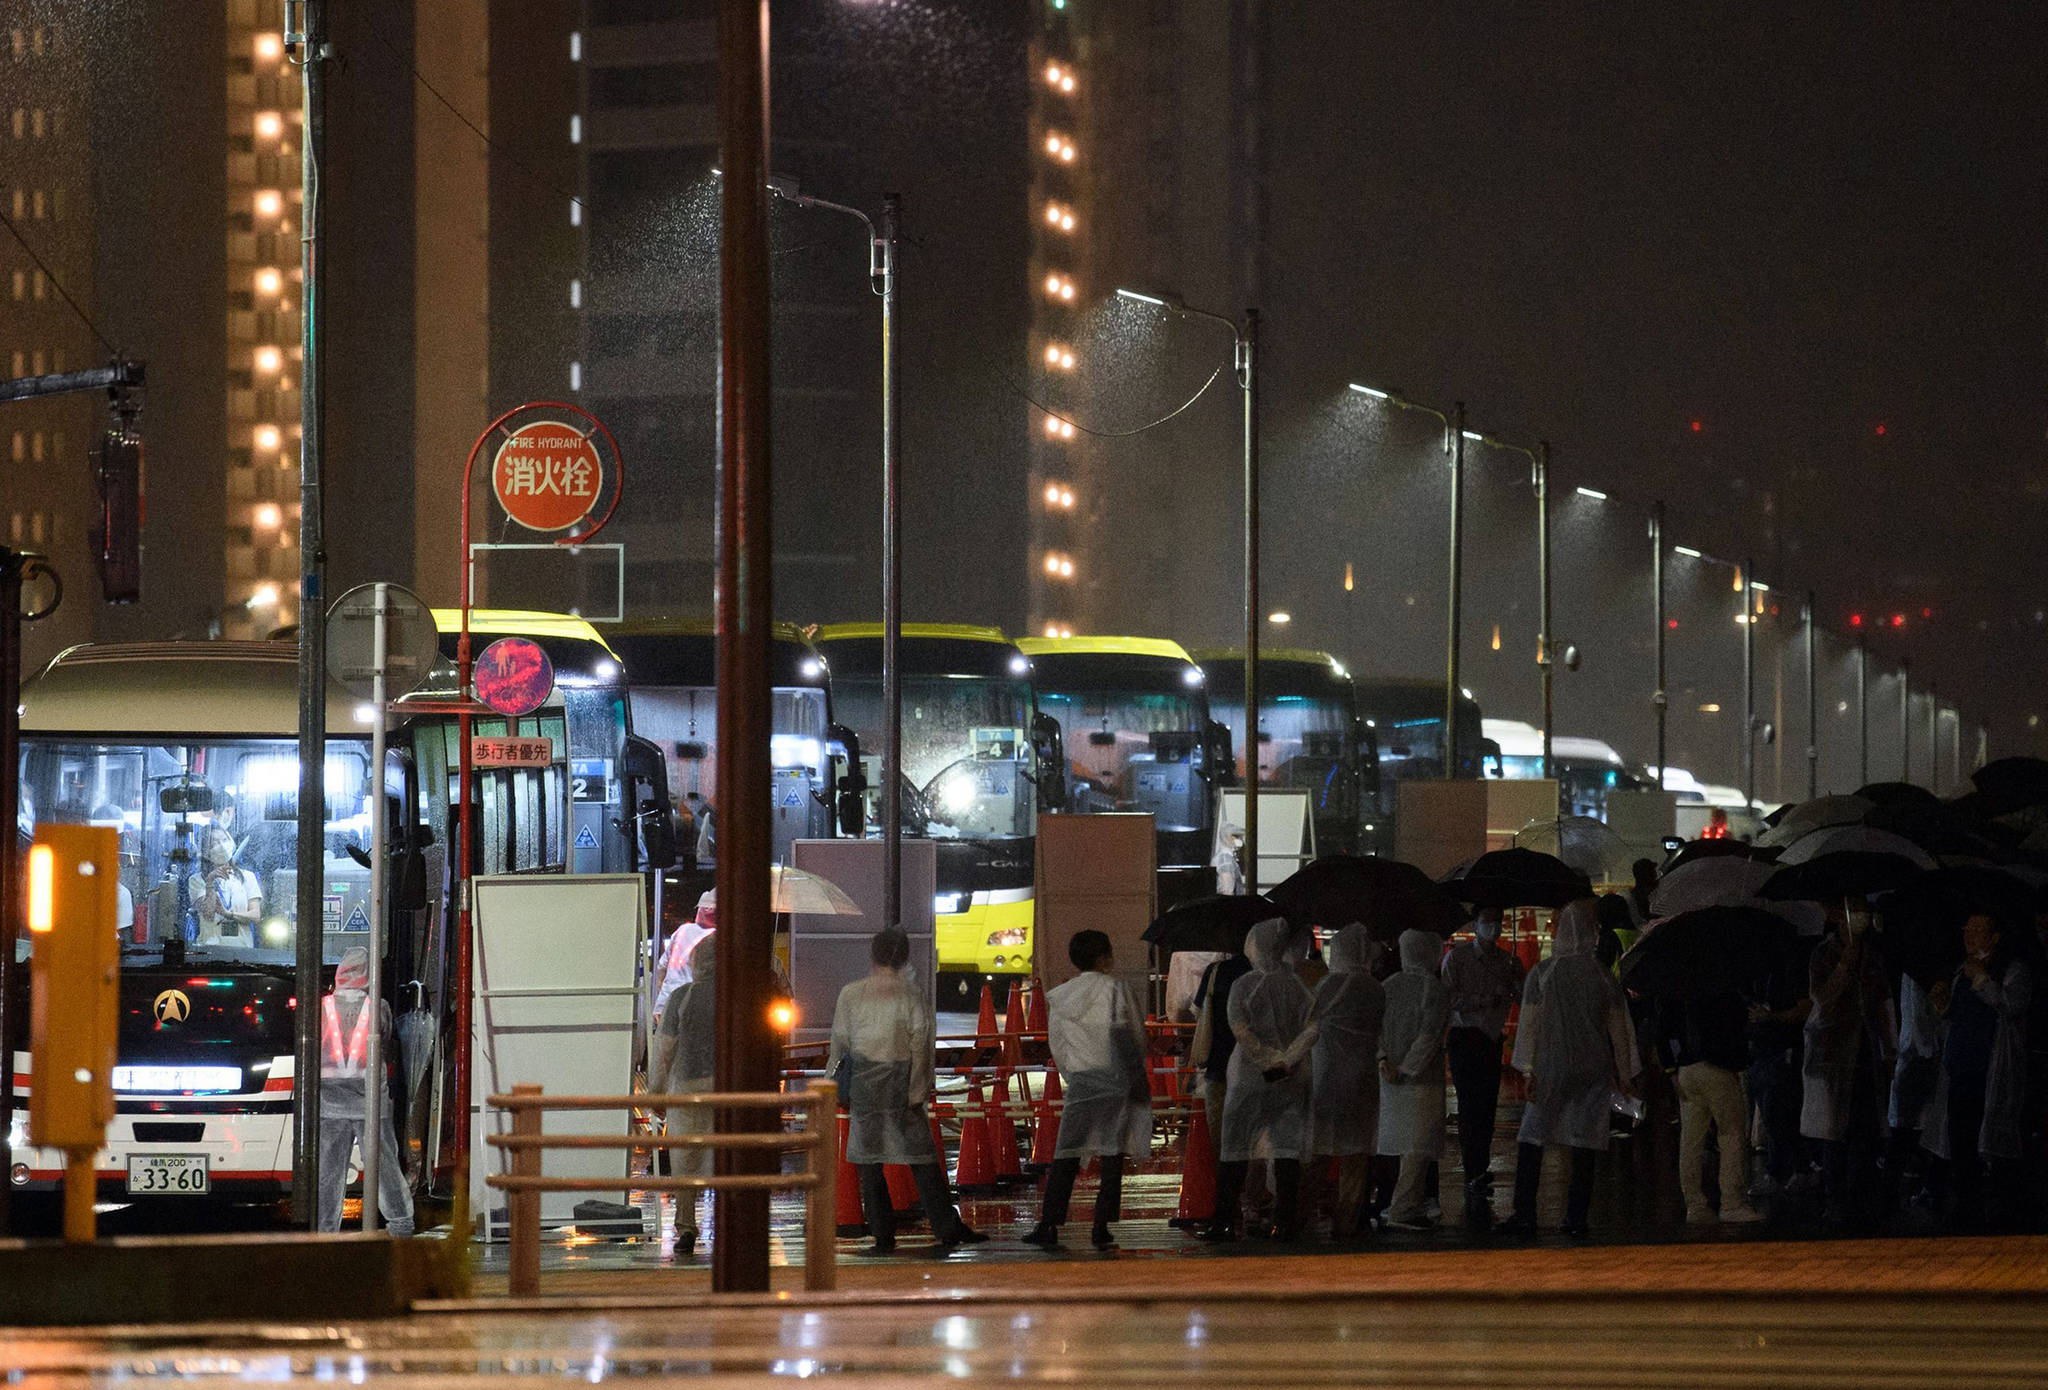 Akio Kon | Getty Images | TNS 
Buses prepare to travel near the Olympic and Paralympic Village in Tokyo on June 20, 2021, during a transport operations simulation for the opening and closing ceremonies of the Tokyo Olympic Games.